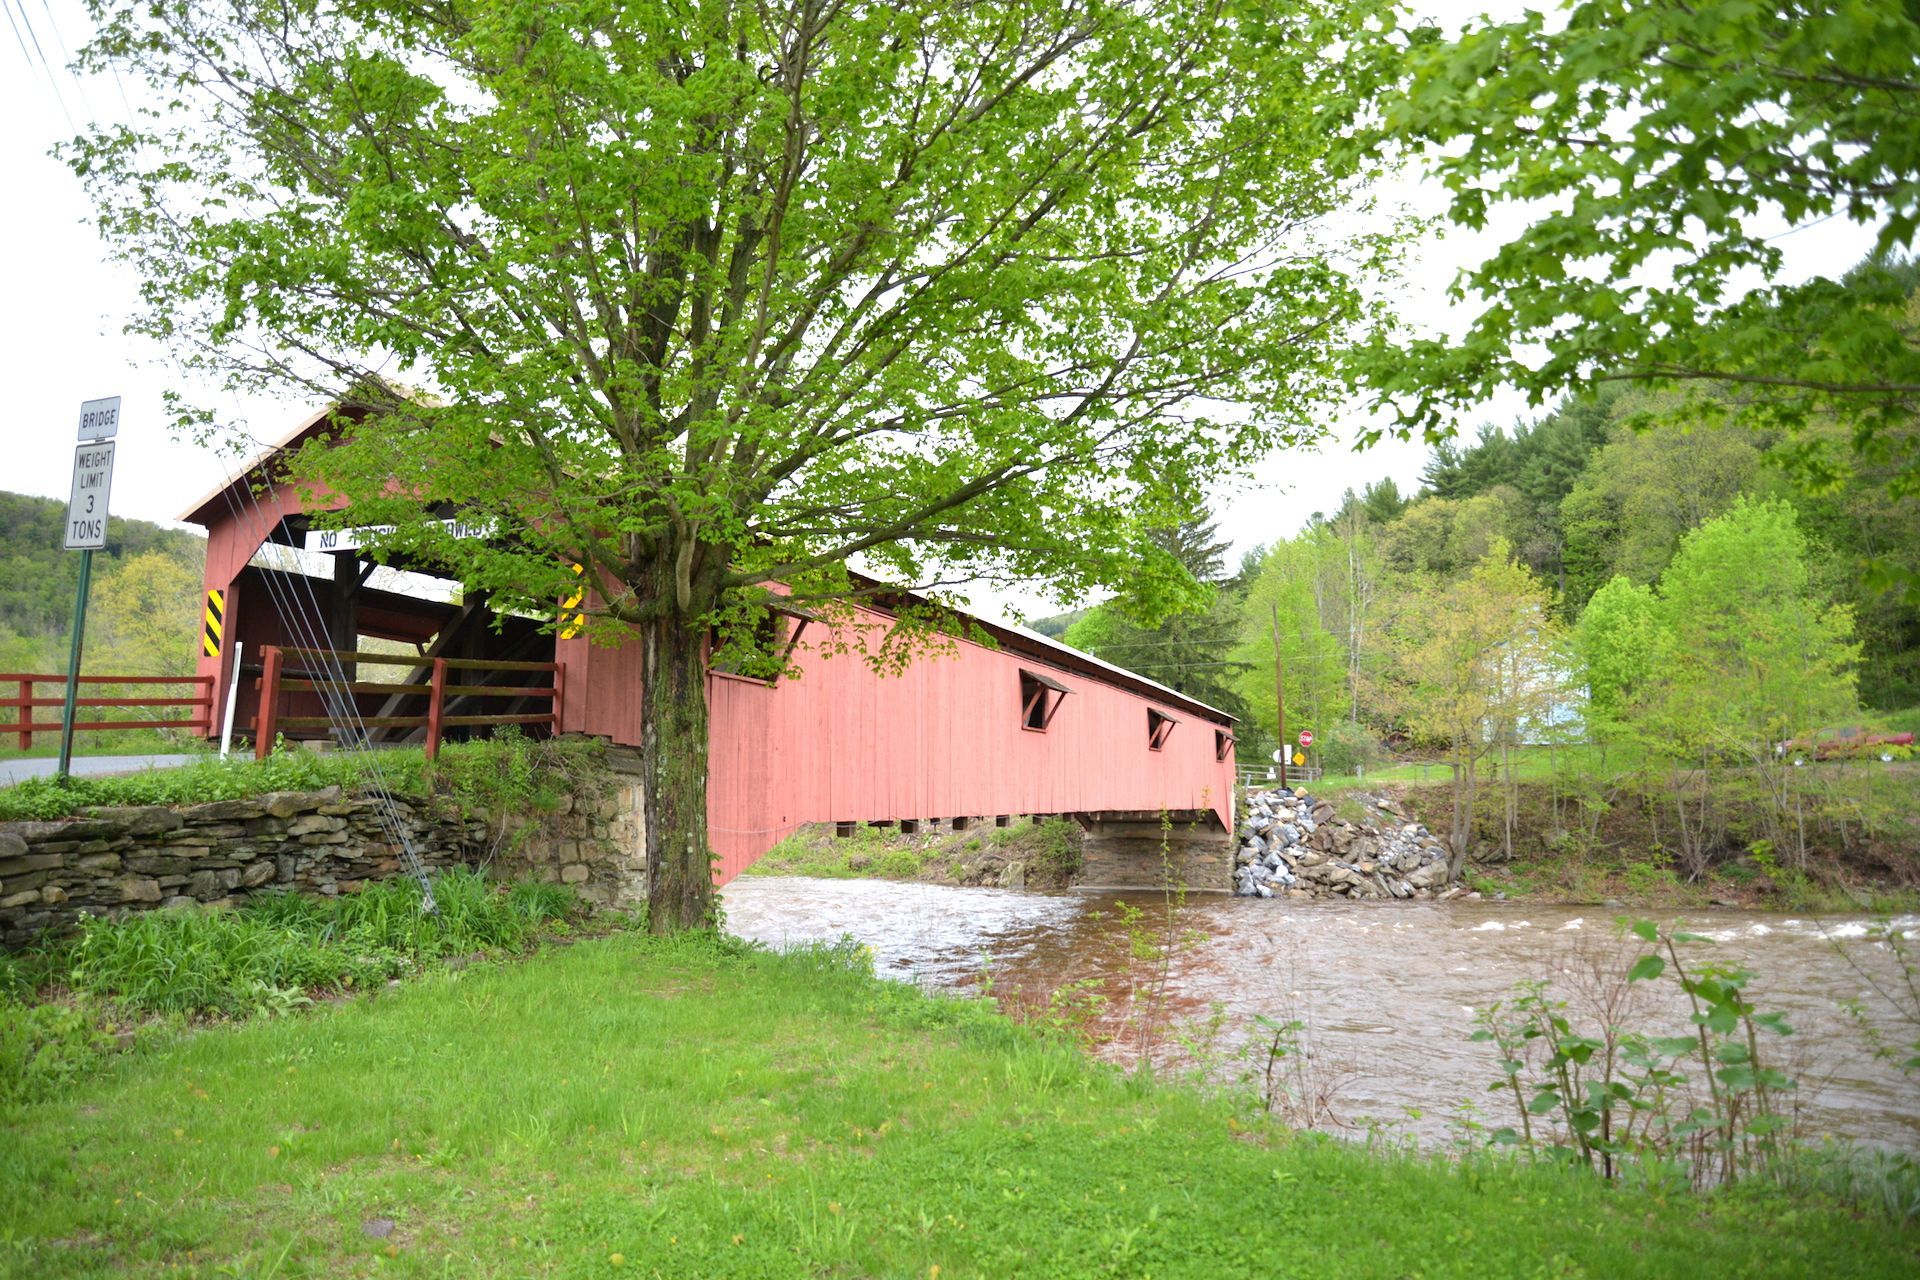 The Covered Bridge, Forksville, PA